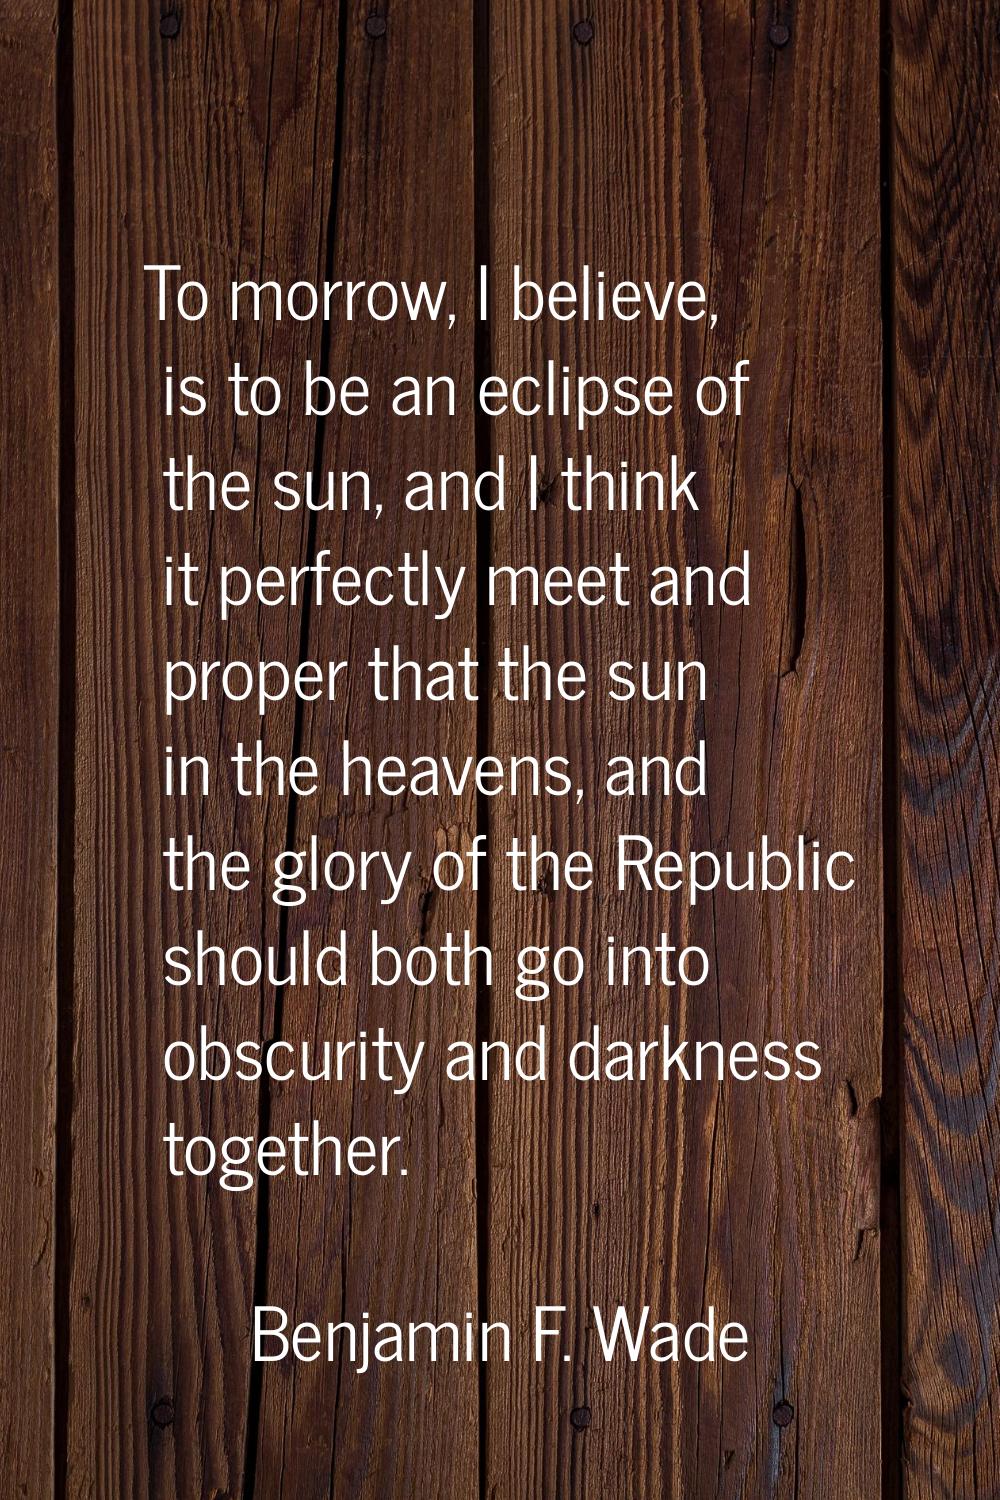 To morrow, I believe, is to be an eclipse of the sun, and I think it perfectly meet and proper that